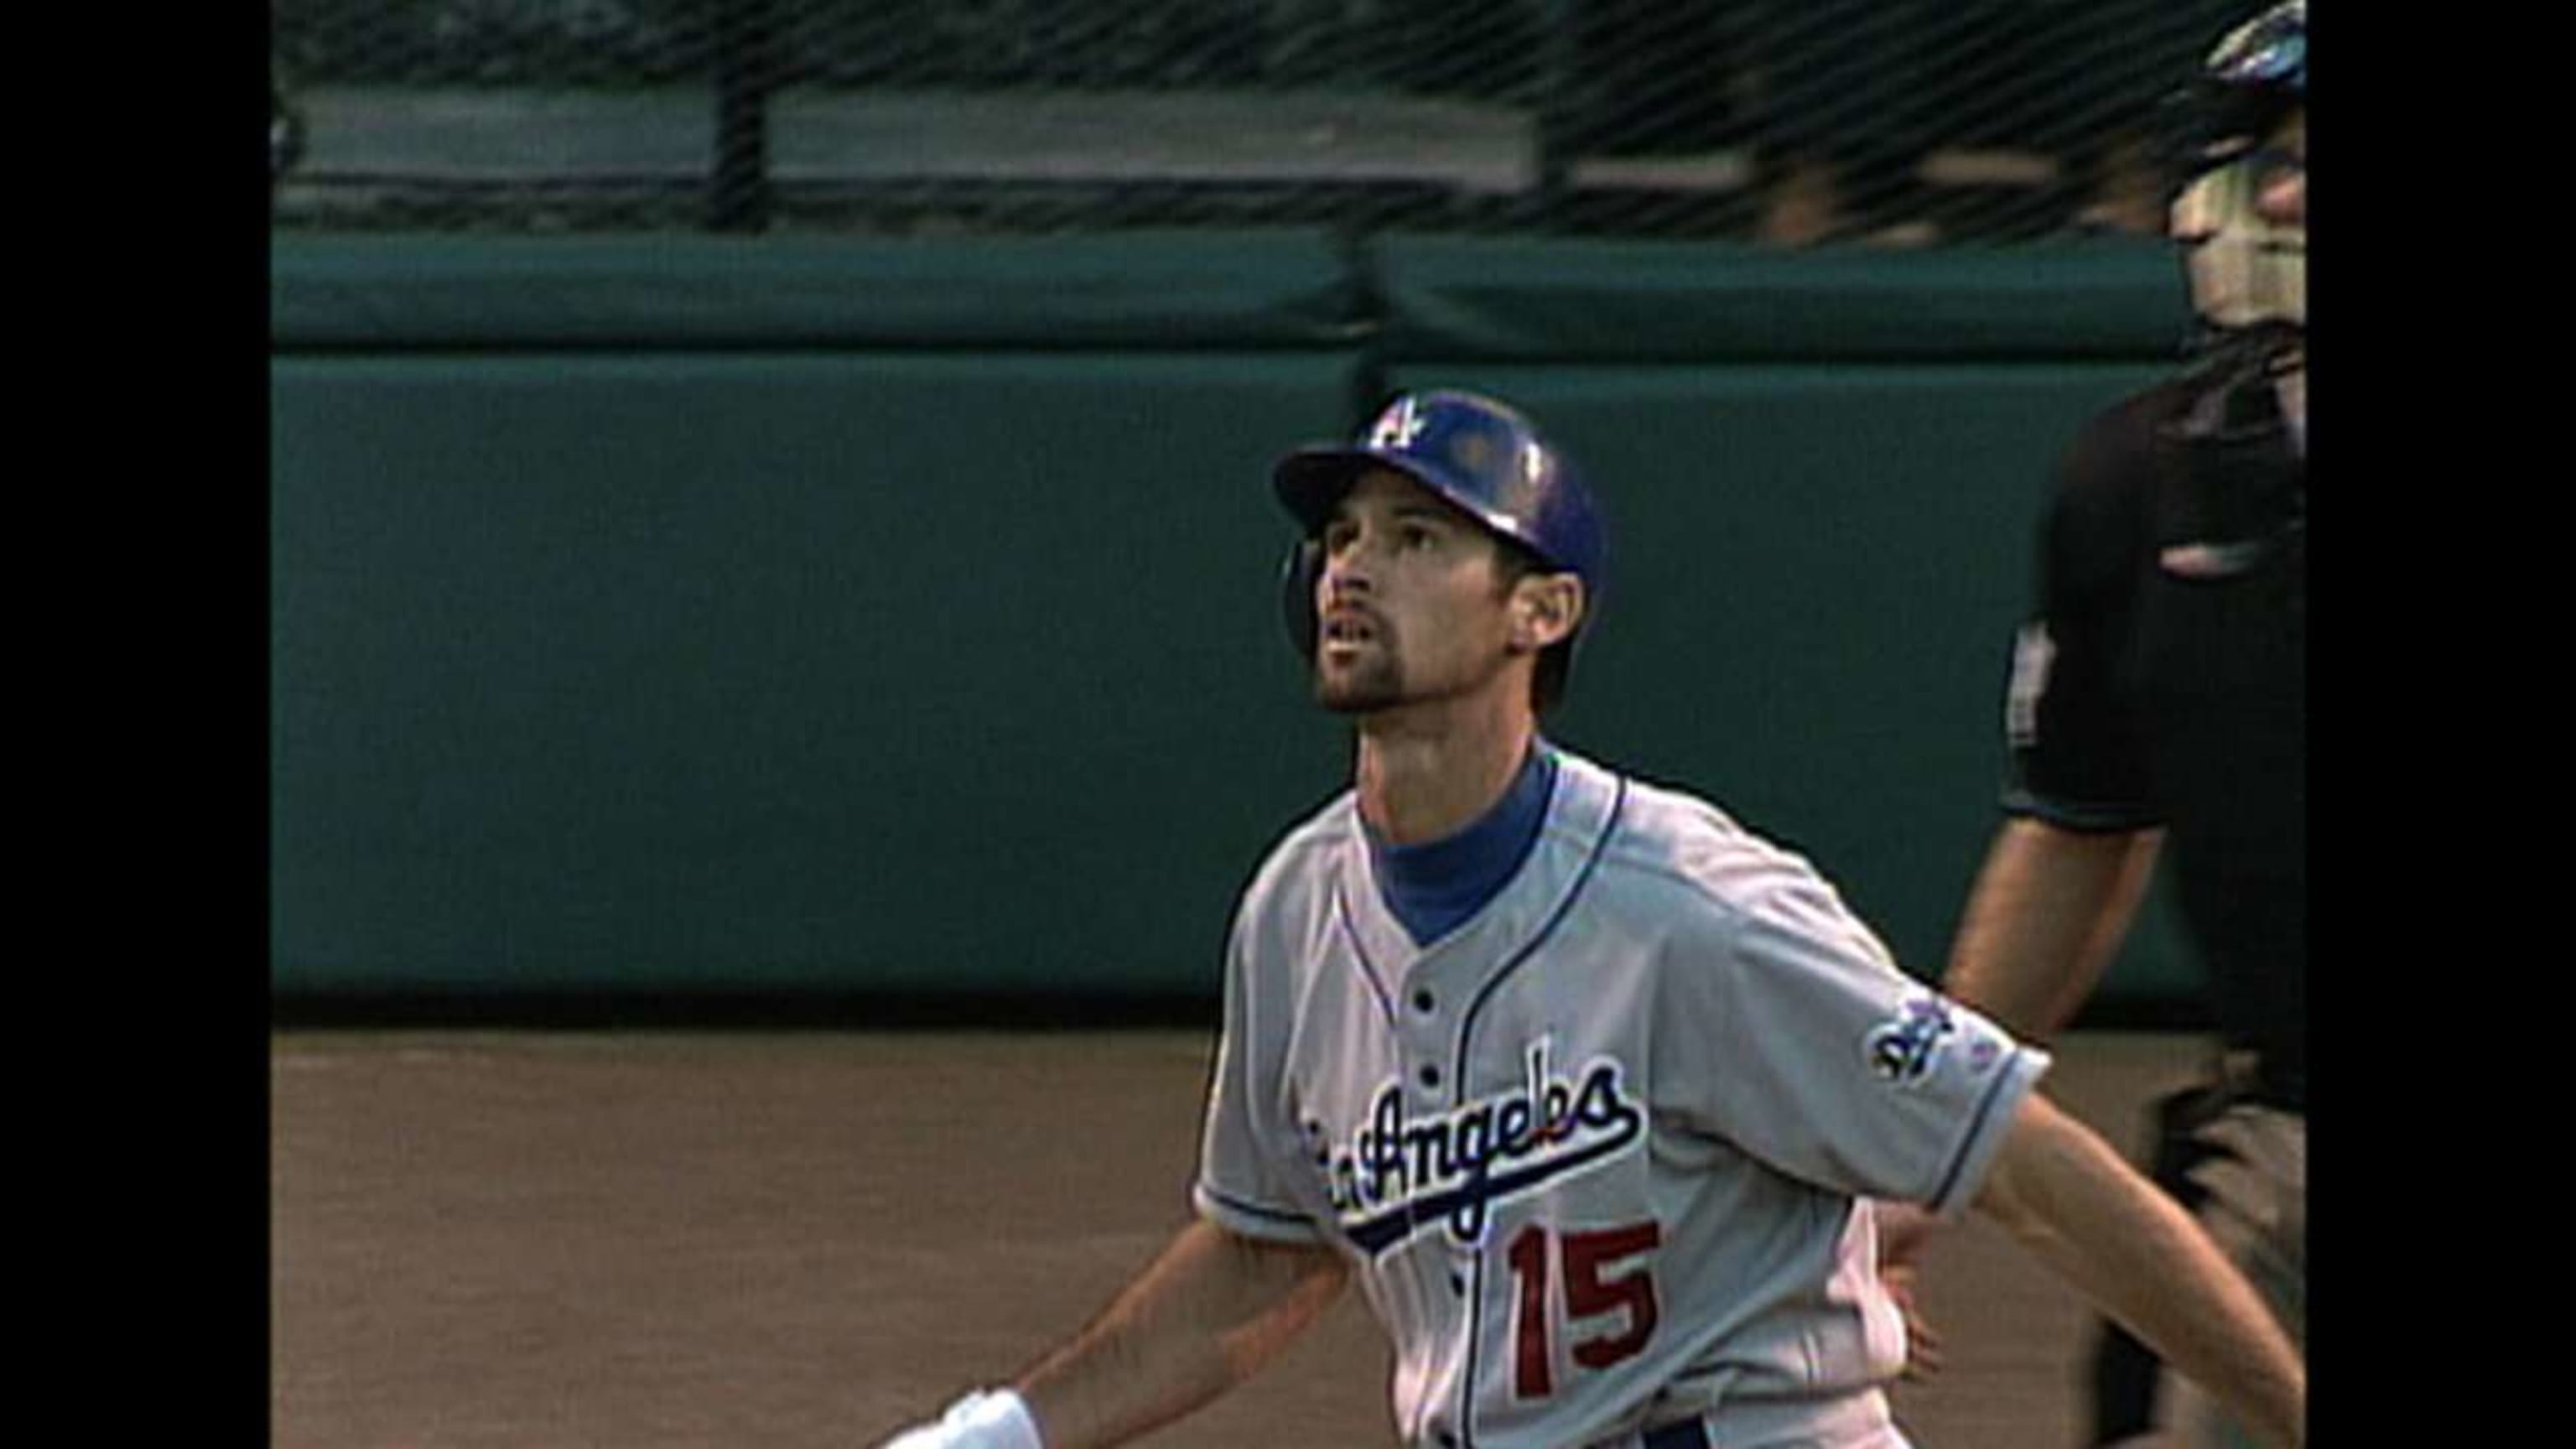 Spectrum SportsNet LA - On this day 18 years ago, Shawn Green was 🔒'ed in,  going 6-for-6 with 4 HRs 7 RBI and 19 total bases.